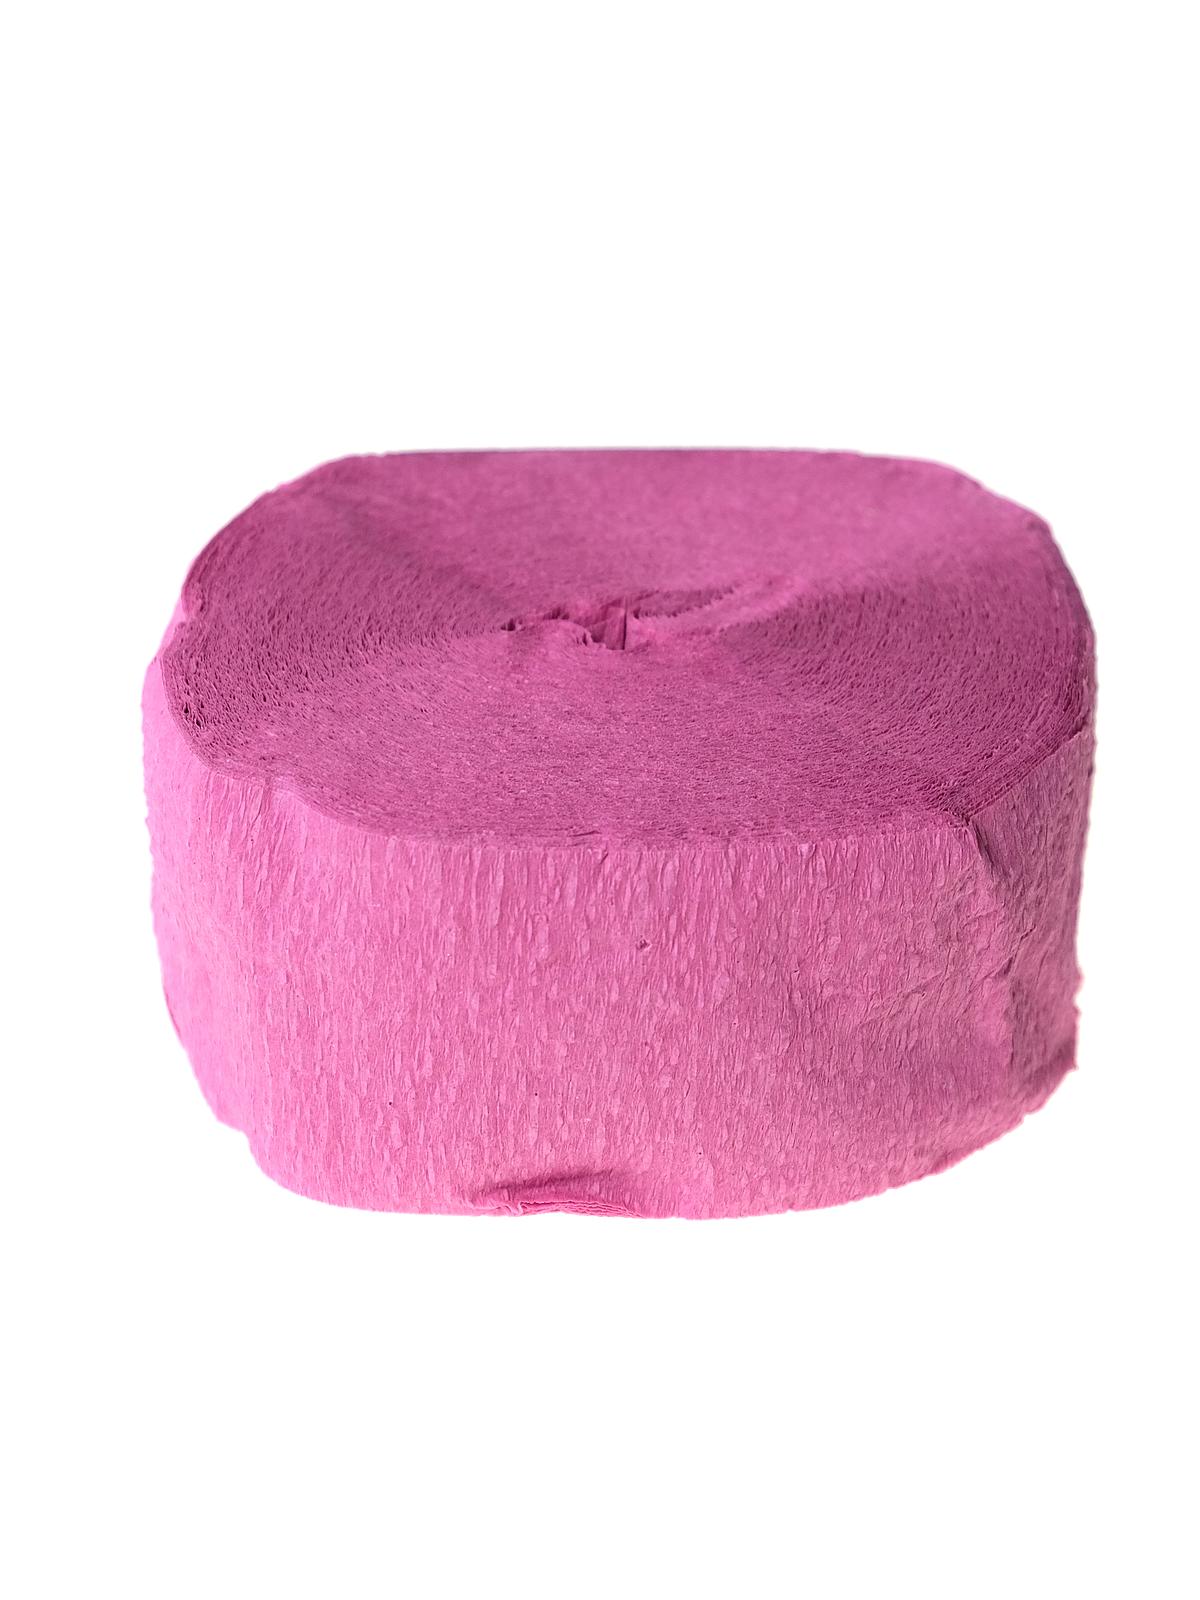 Crepe Paper Streamers 1.75 In. X 81 Ft. Hot Pink